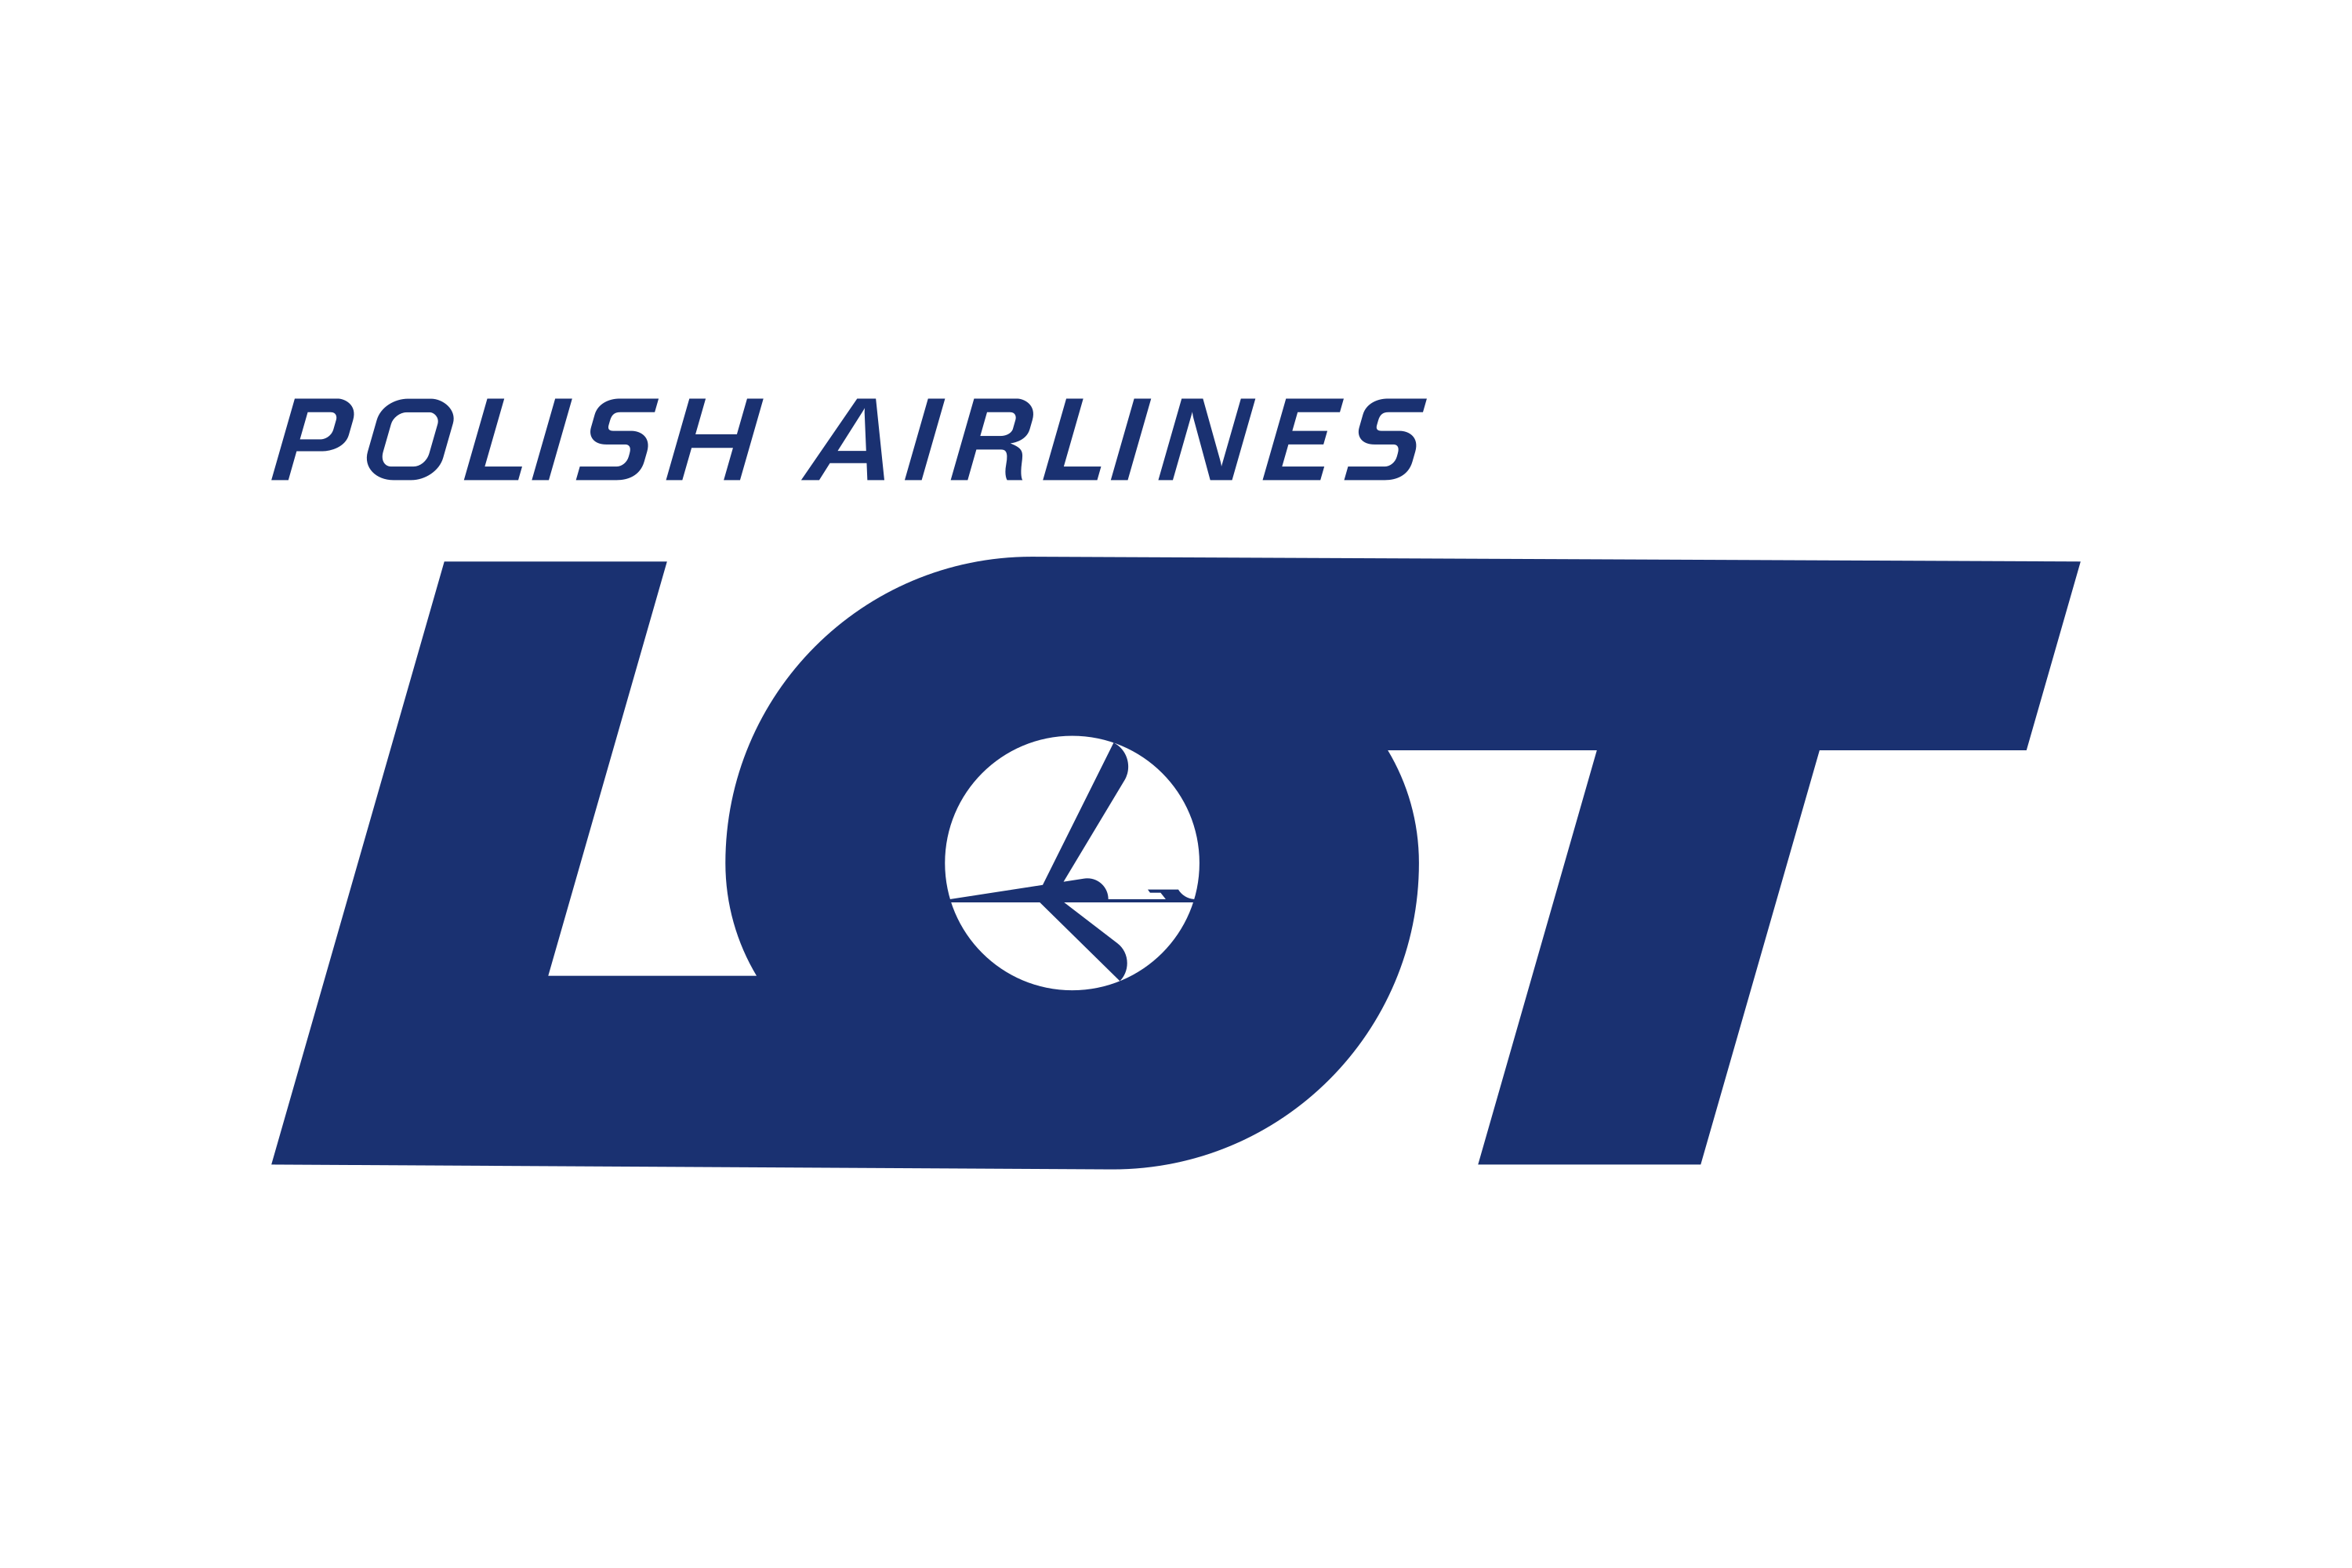 Download LOT Polish Airlines Logo in SVG Vector or PNG File Format